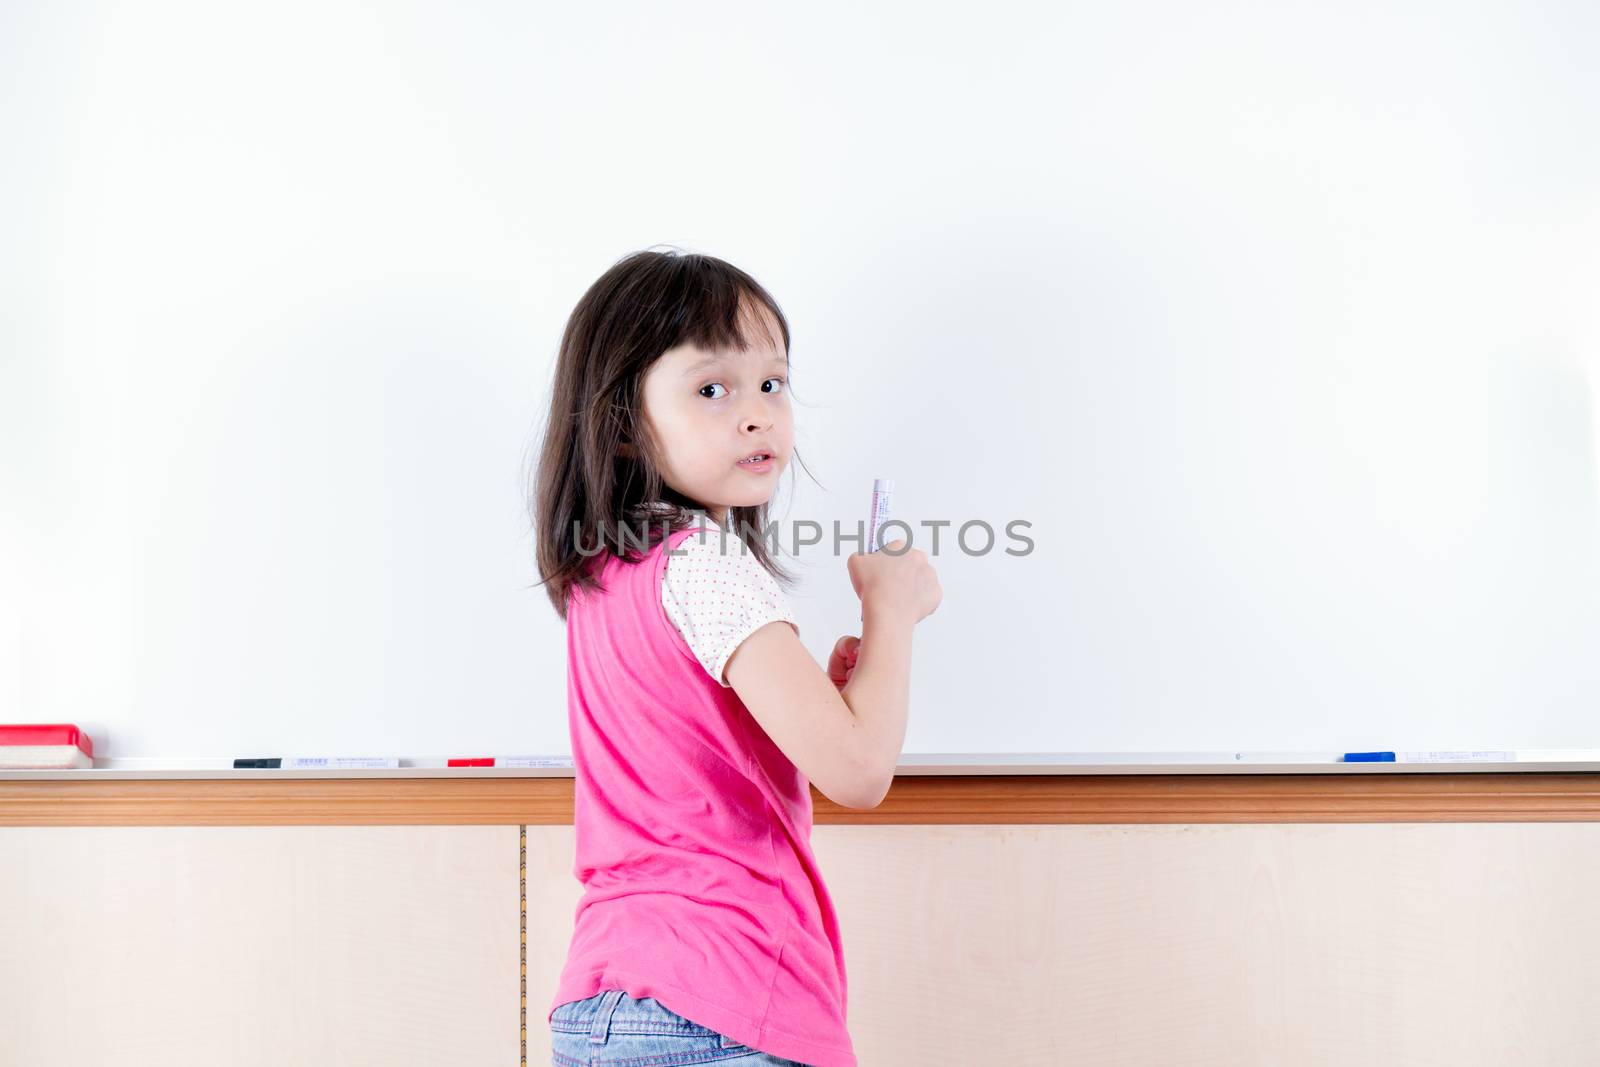 Child at whiteboard looking back